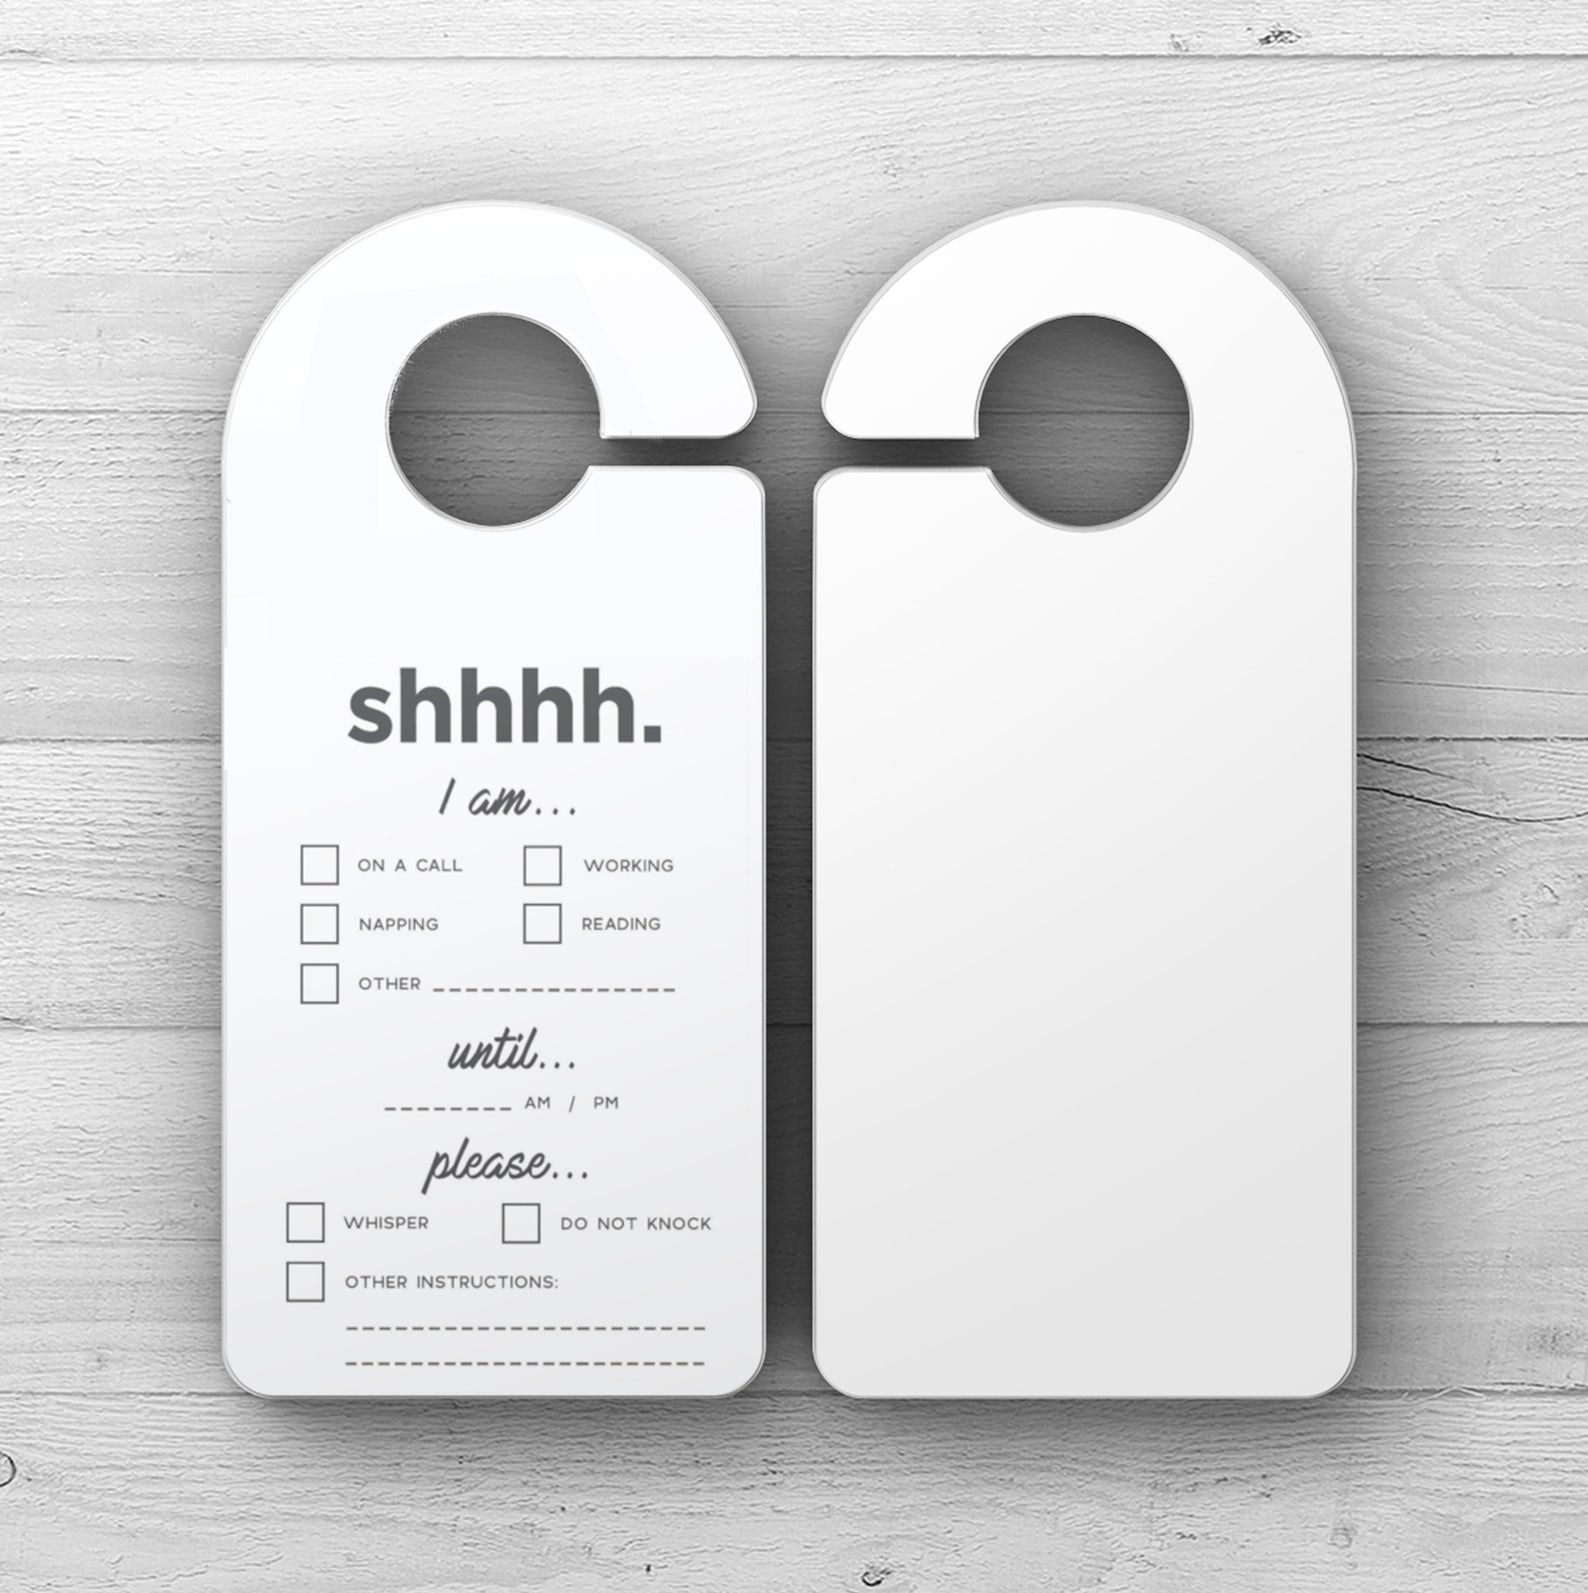 Hanger that says &quot;shhh, i am&quot; with options for being on a call, working, reading, napping, and other instructions 